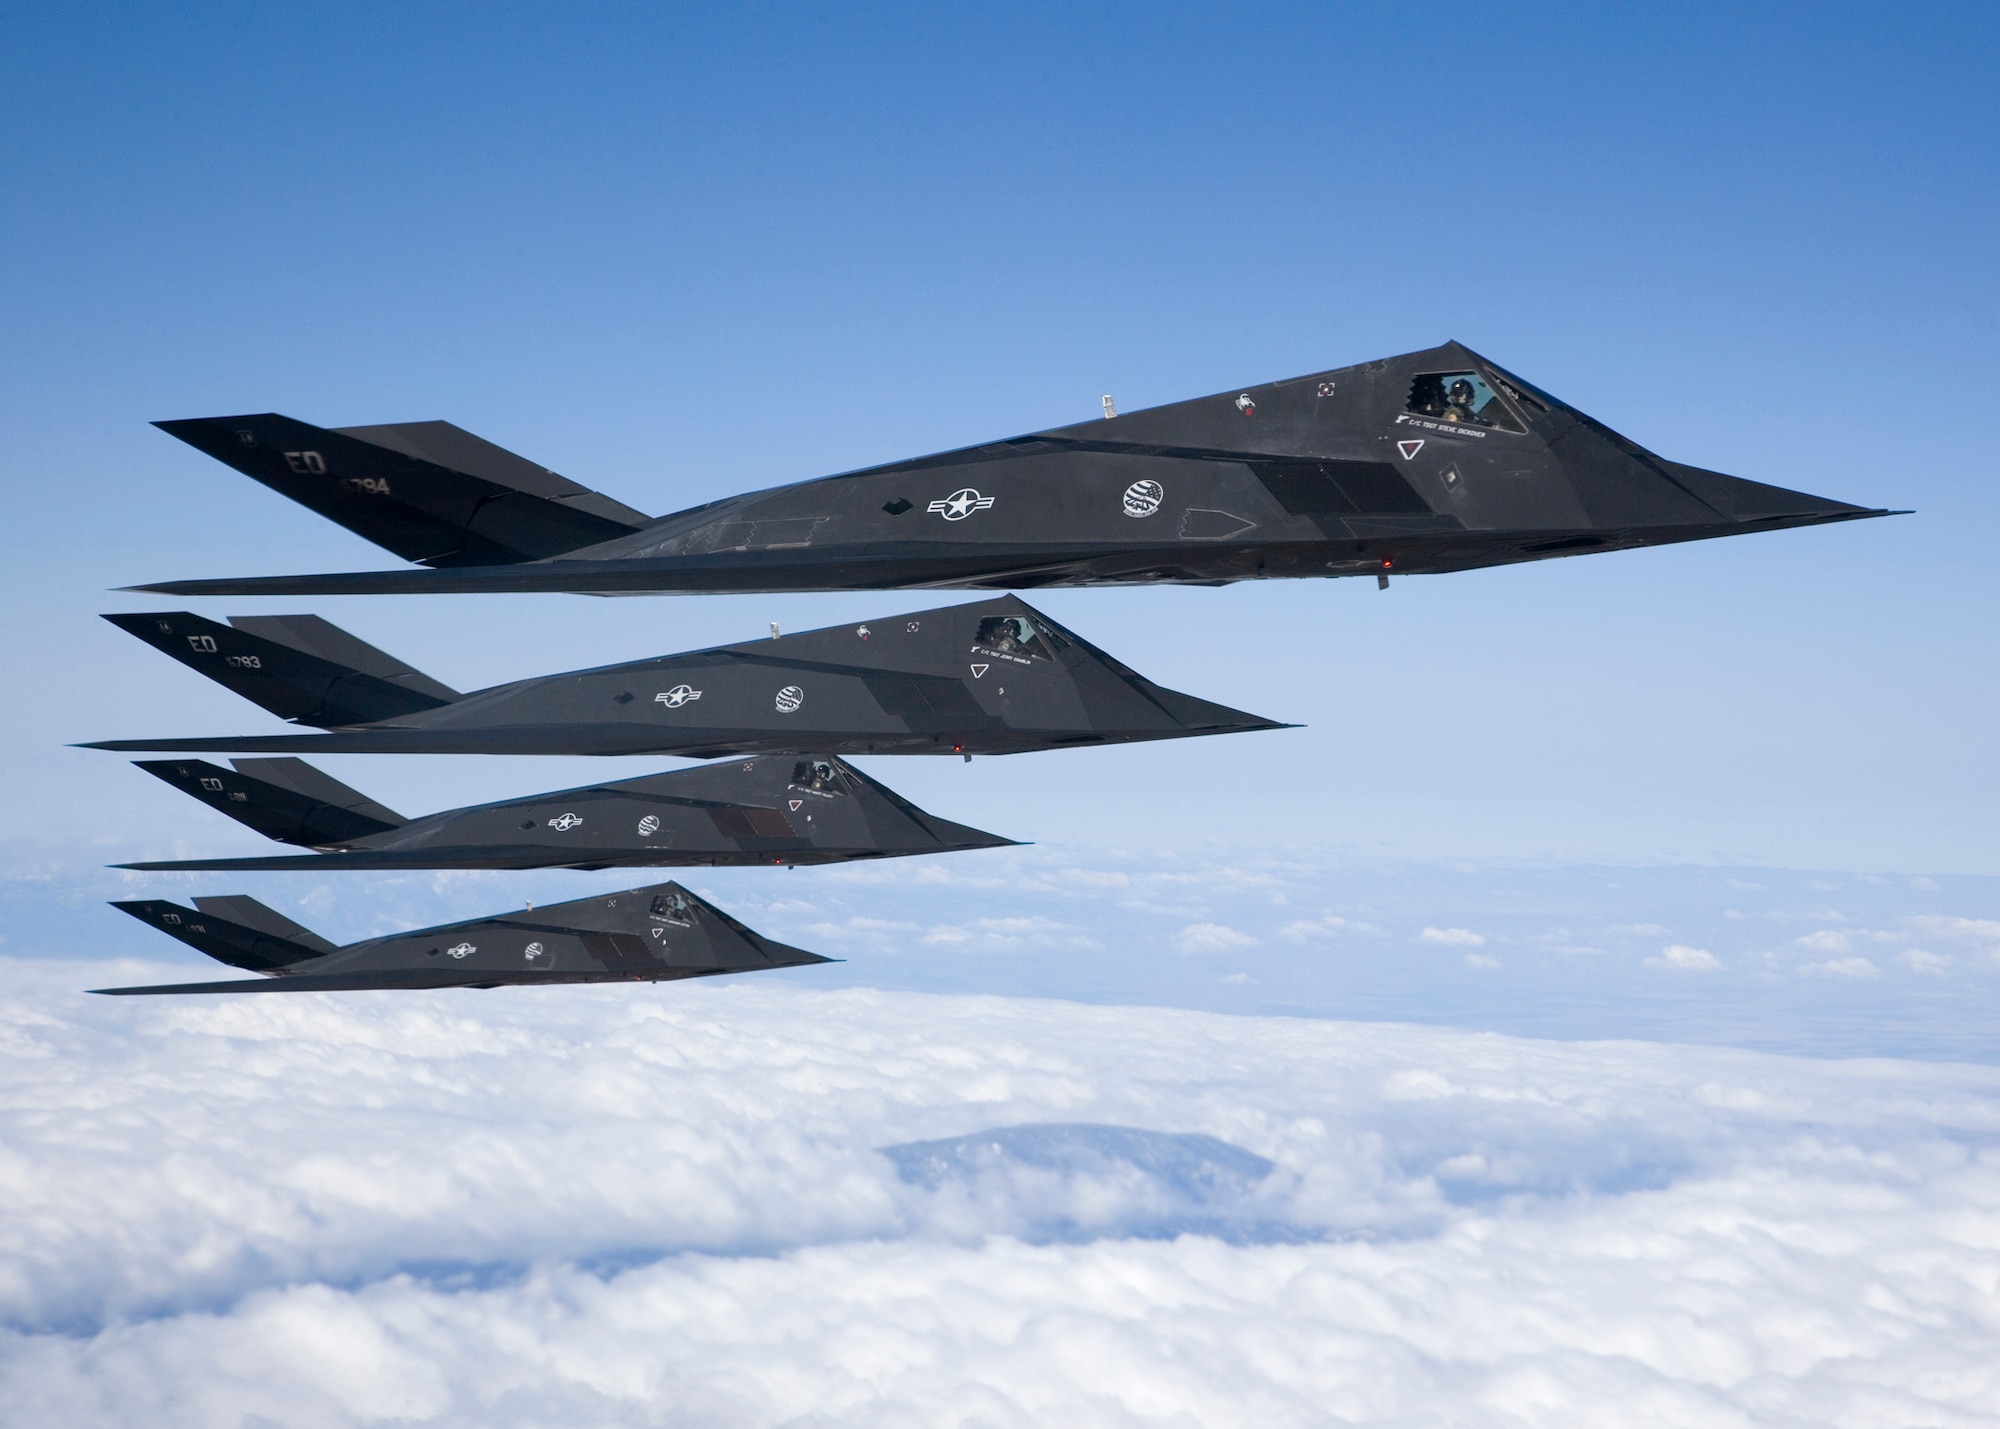 EDWARDS AIR FORCE BASE, Calif. -- Four F-117 Nighthawks fly in formation during a sortie over the Antelope Valley recently. After 25 years of history, the aircraft is set to retire soon. As the Air Force's first stealth fighter, the F-117 is capable of performing reconnaissance missions and bombing critical targets, all without the enemy's knowledge. (Photo by Bobbi Zapka)